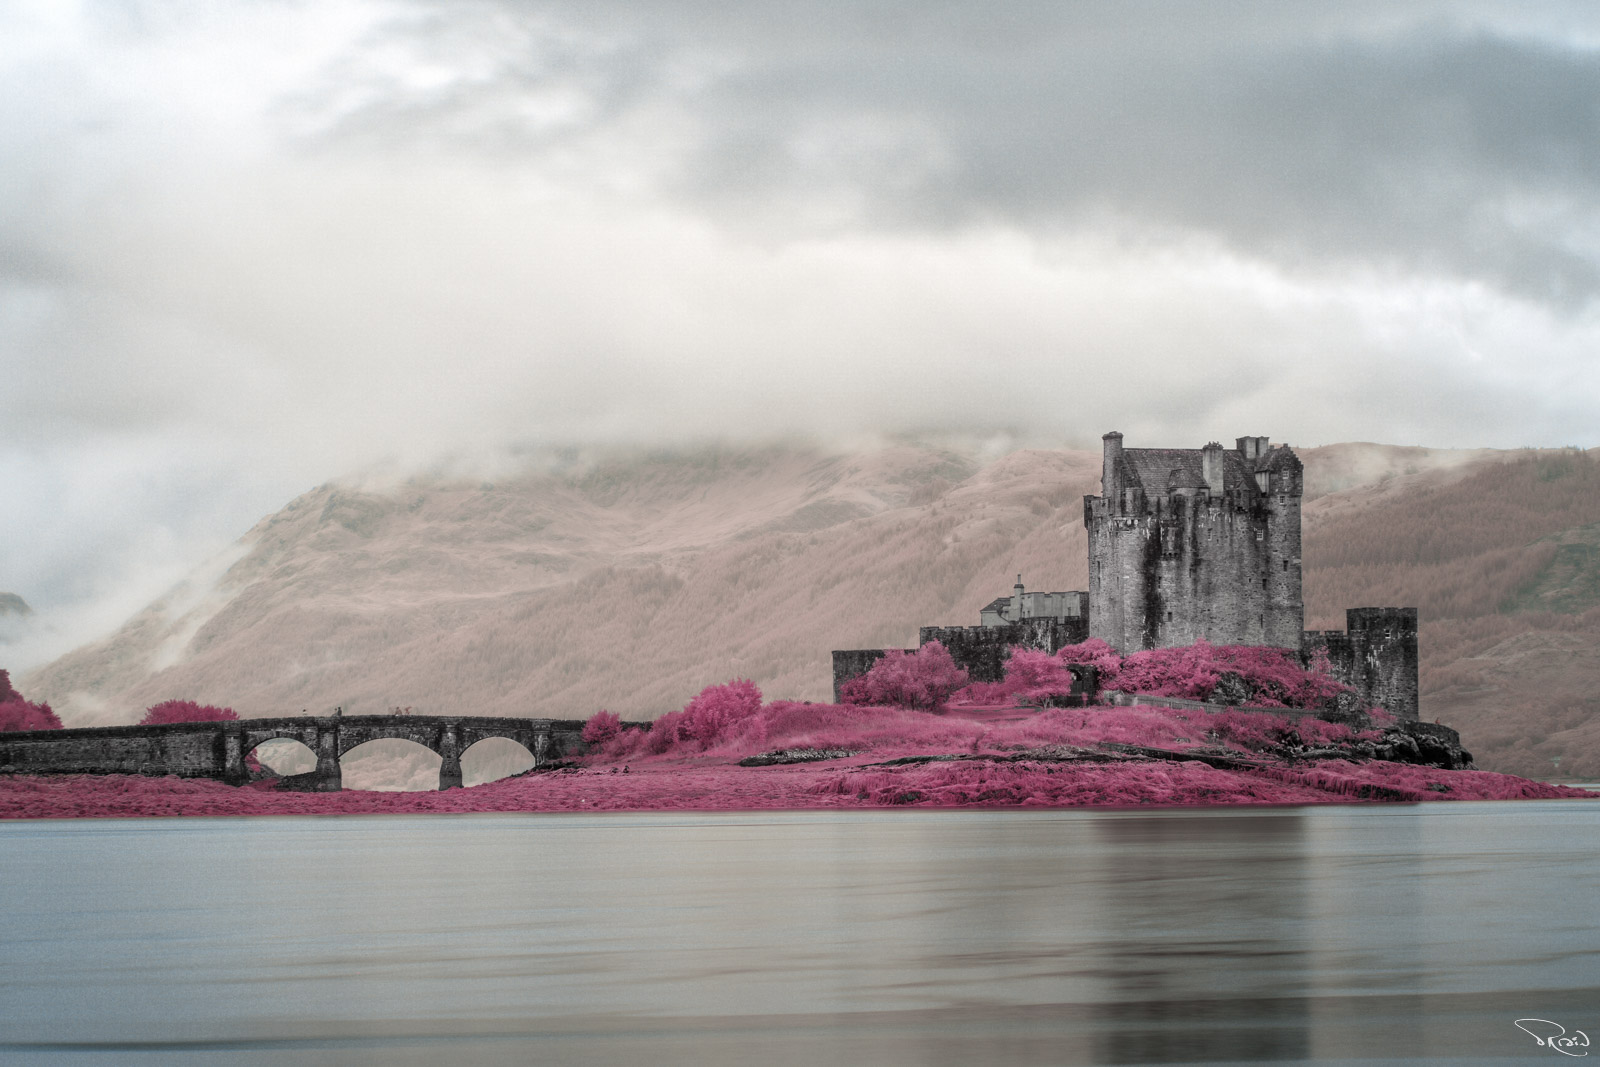 A 13-century stone castle sits on an island surrounded by deep pink heather. Fog is creeping down the hills in the background.